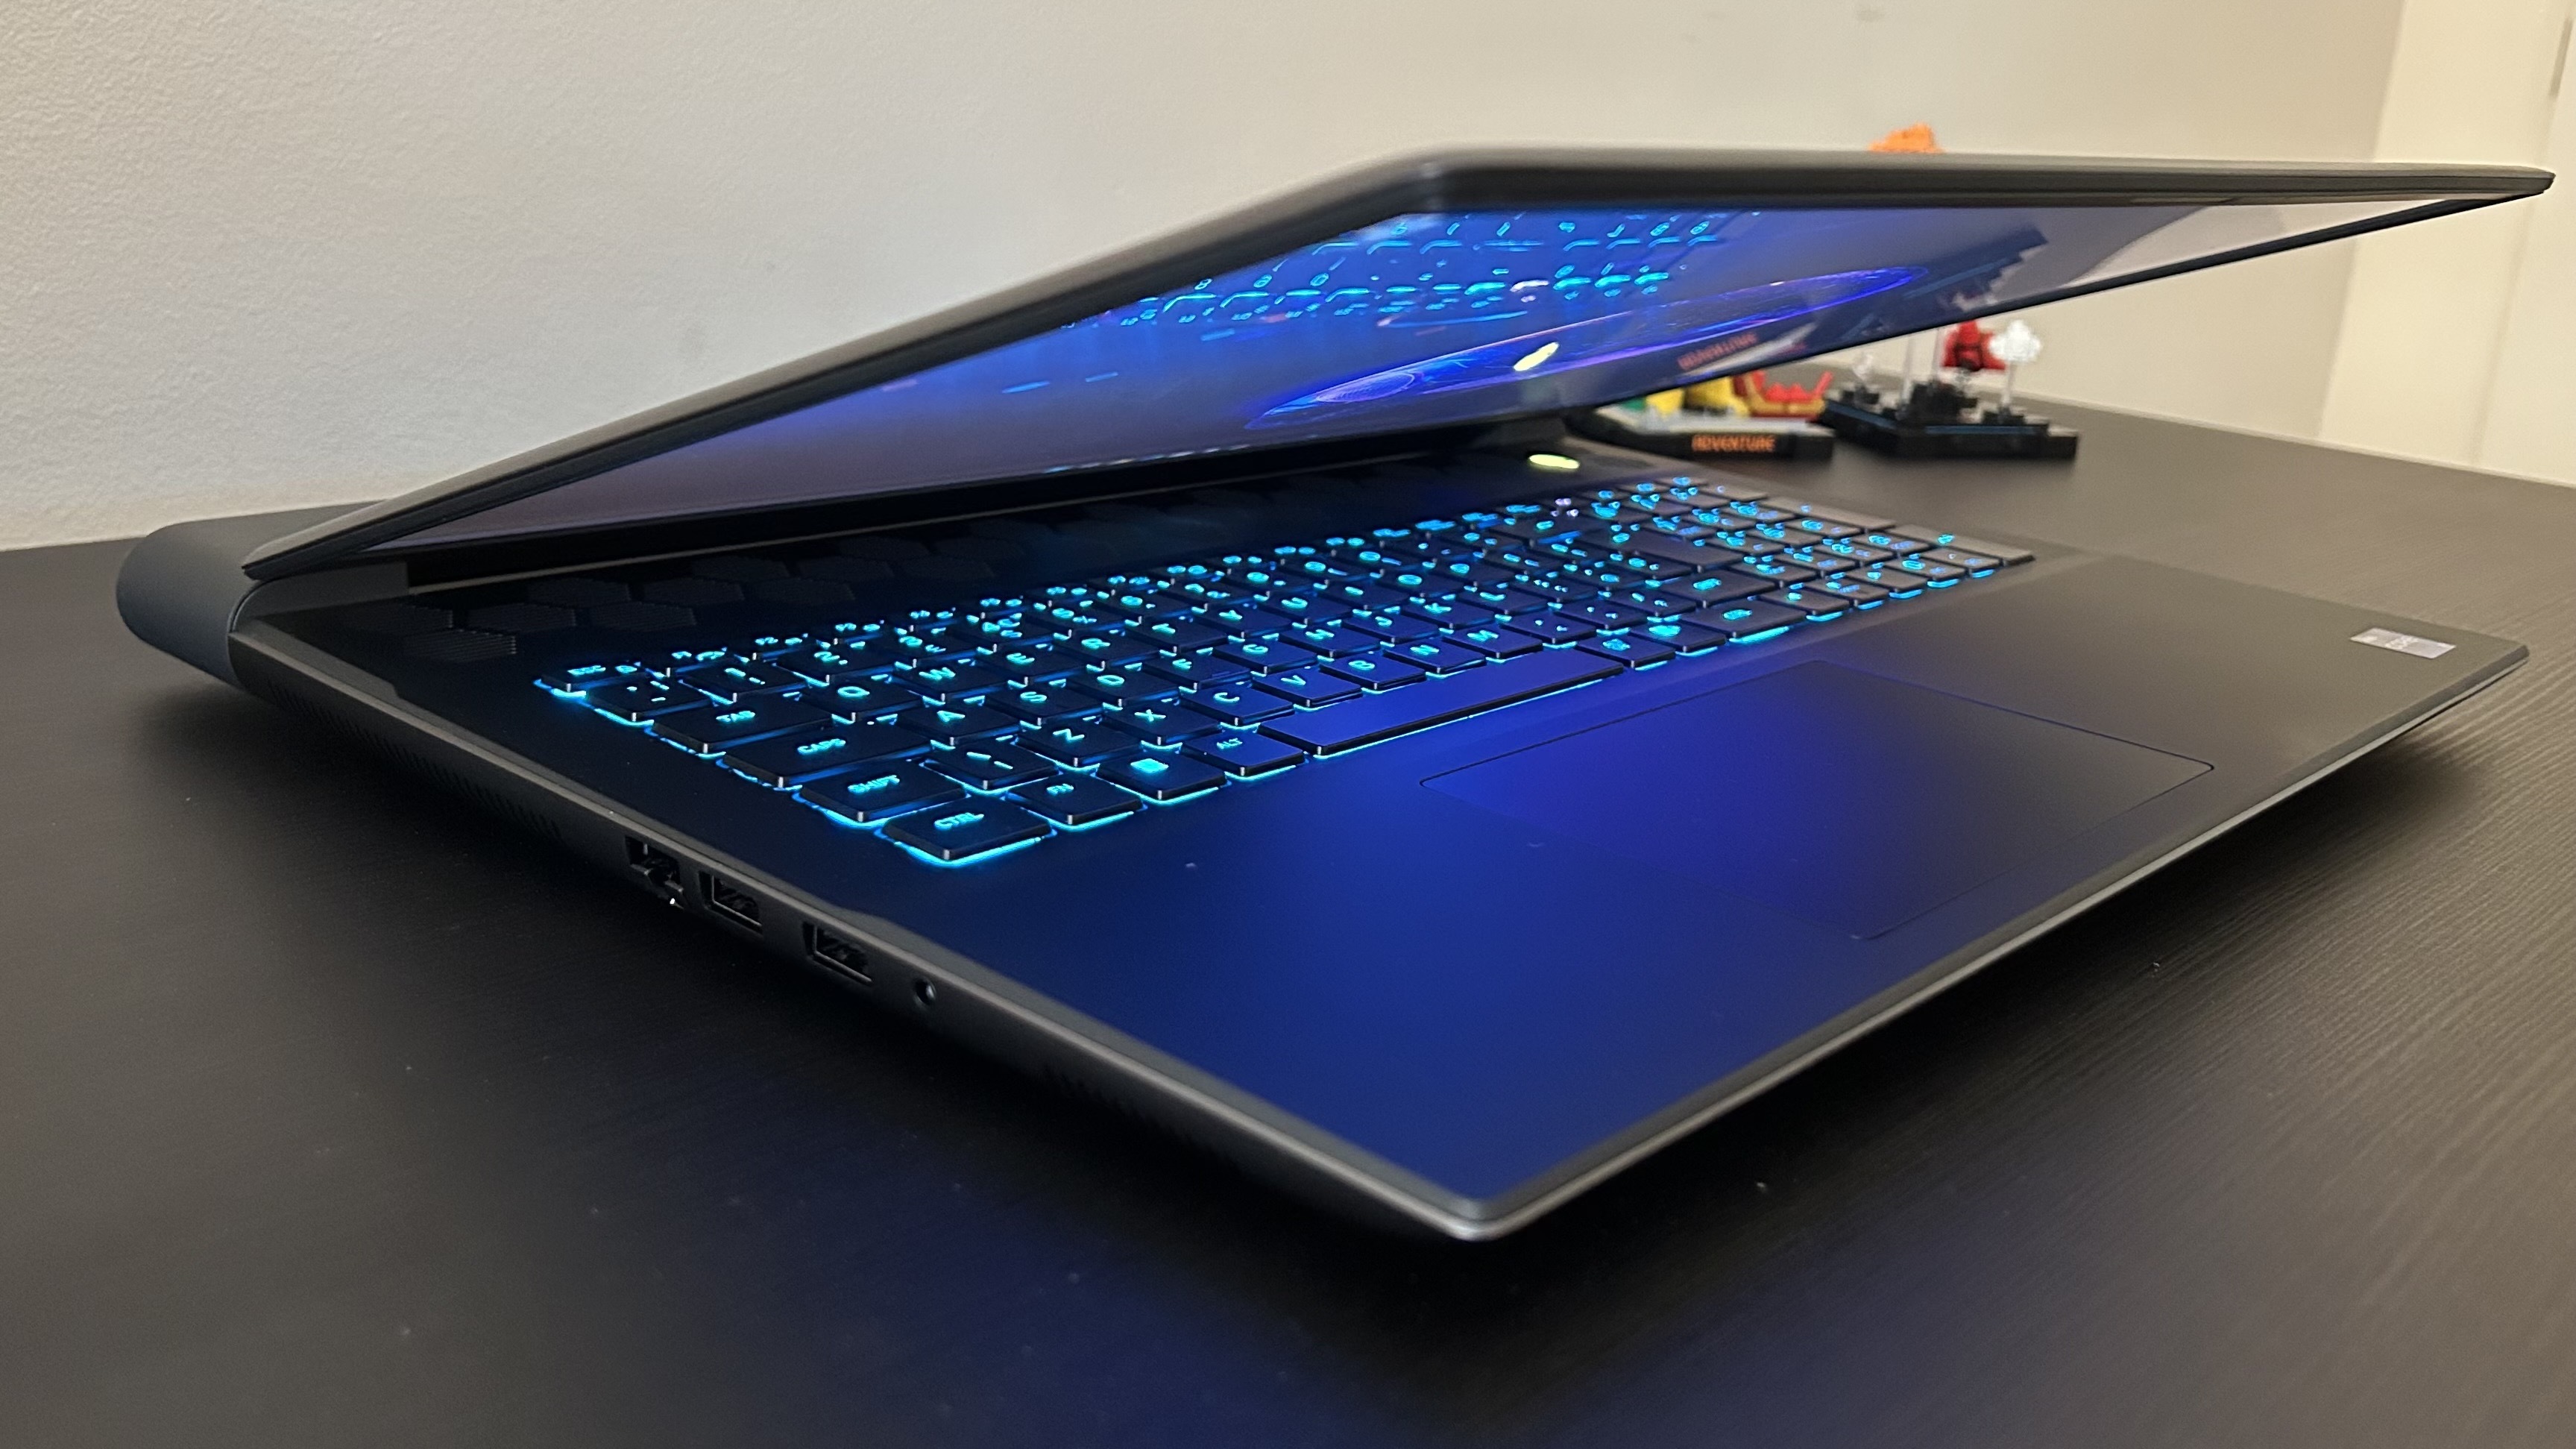 Alienware M18 gaming laptop with the lid slightly closed